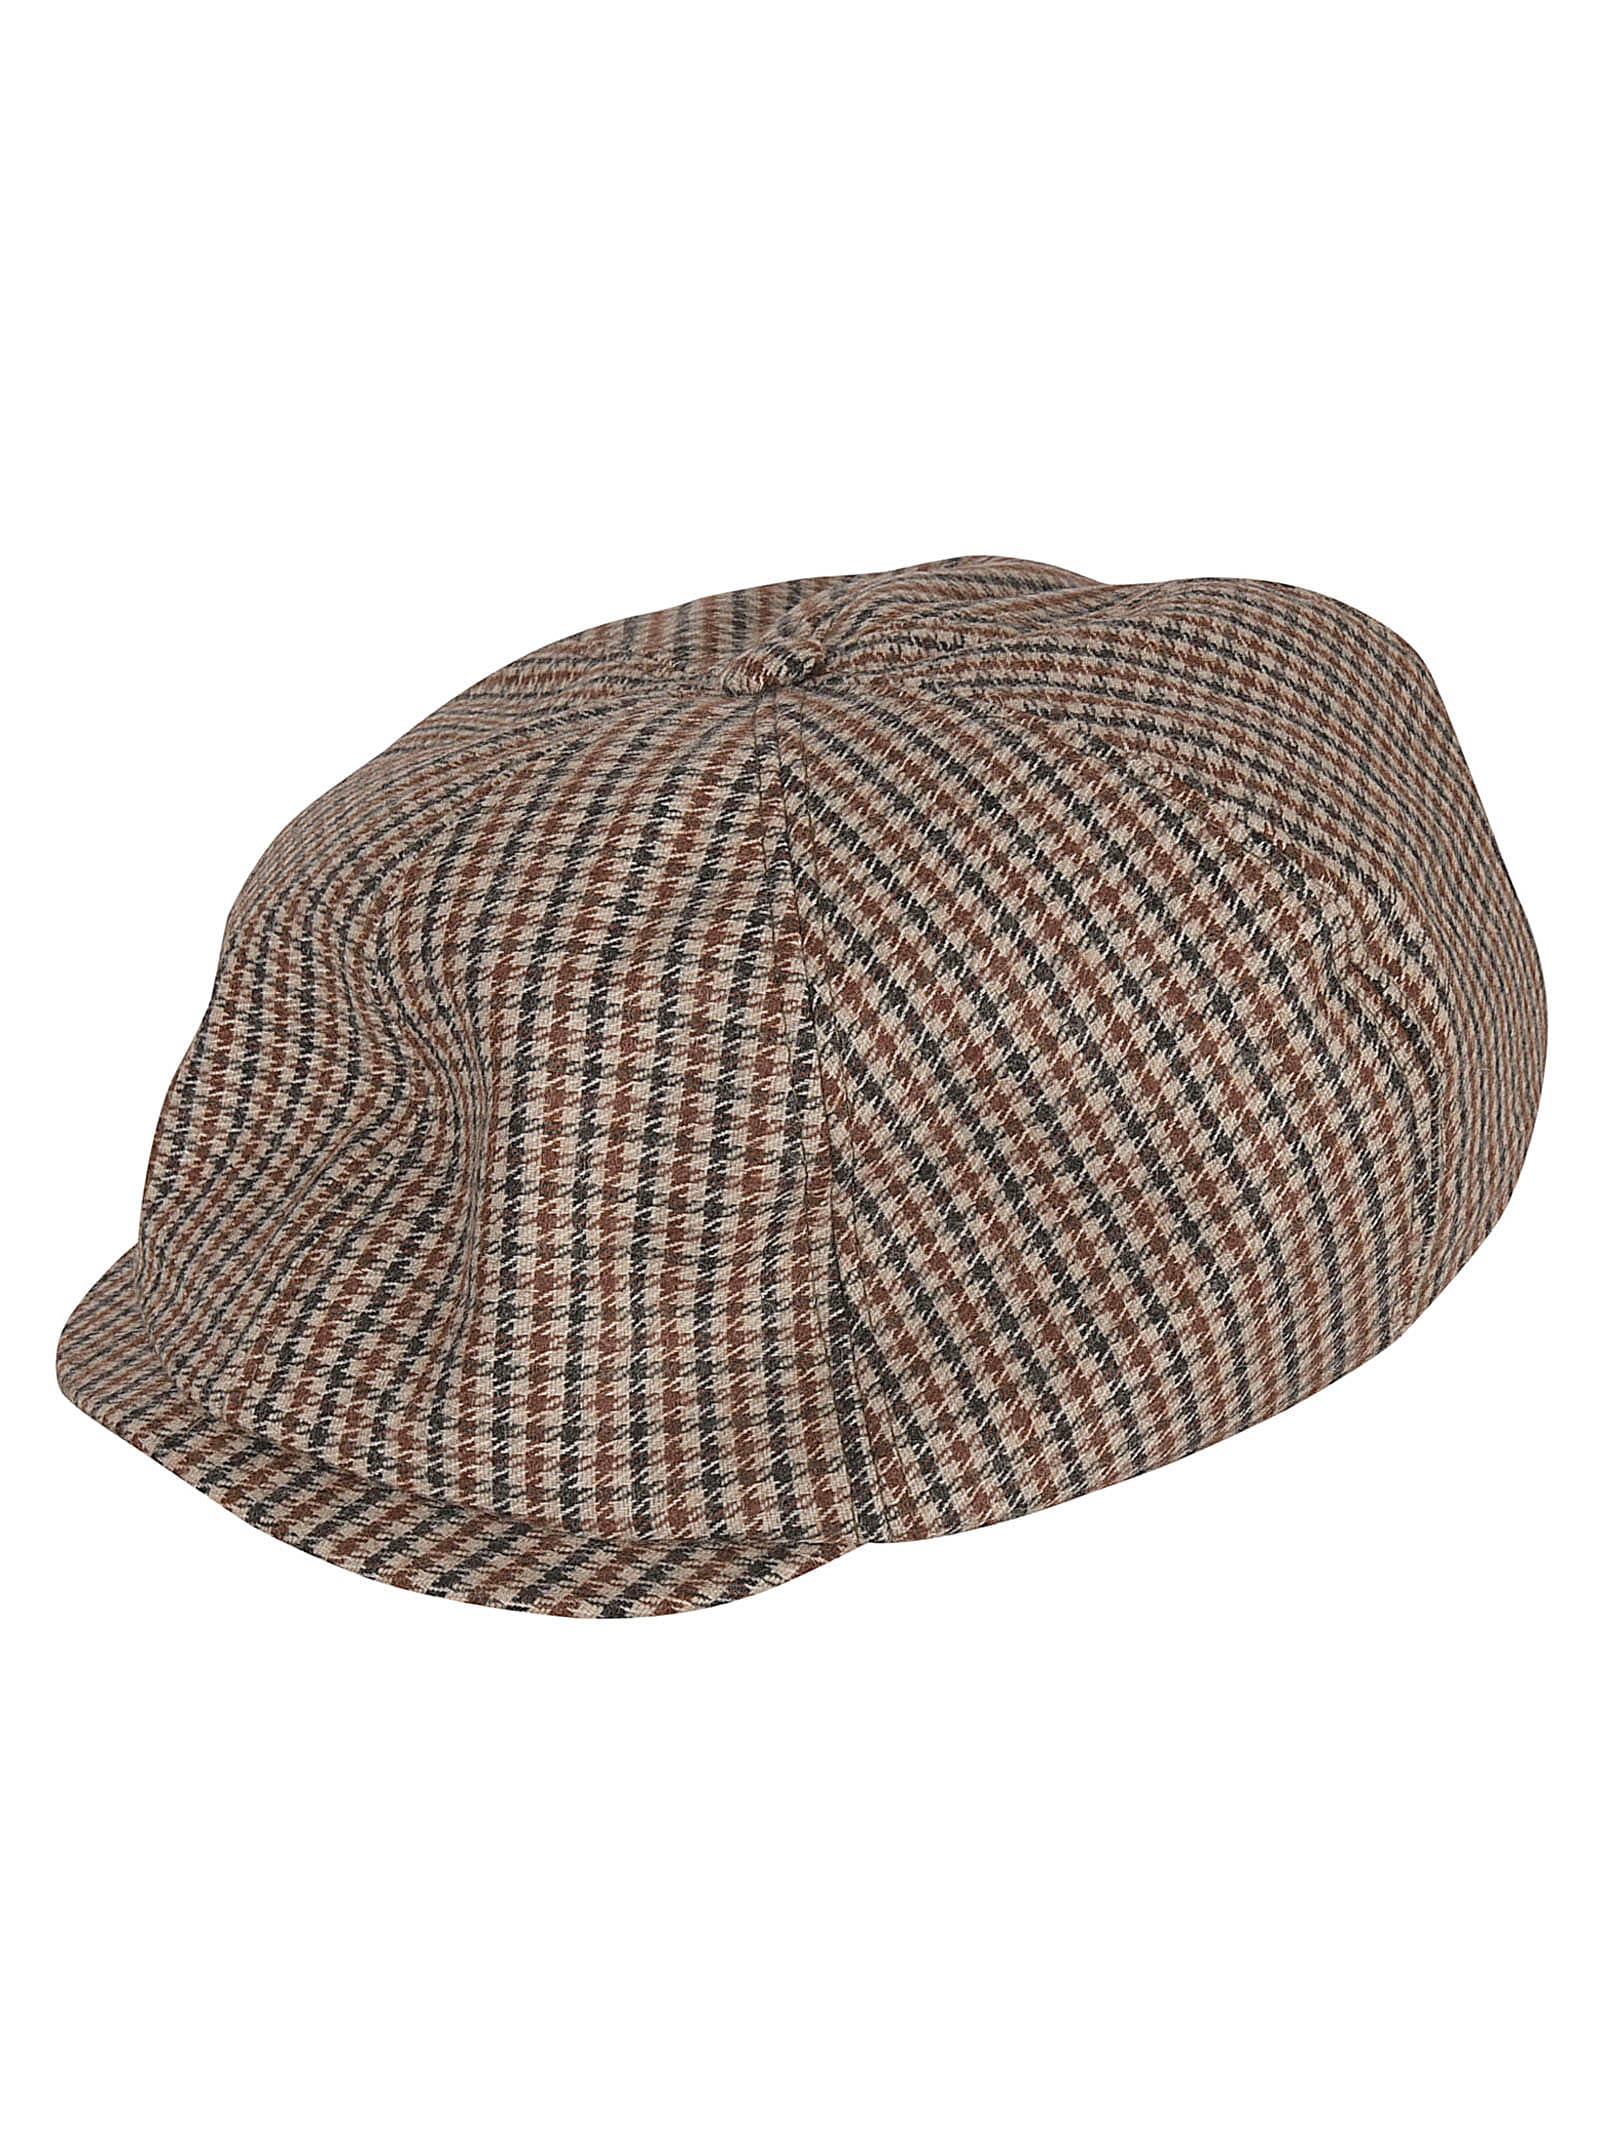 Dsquared2 Houndstooth Patterned Hat